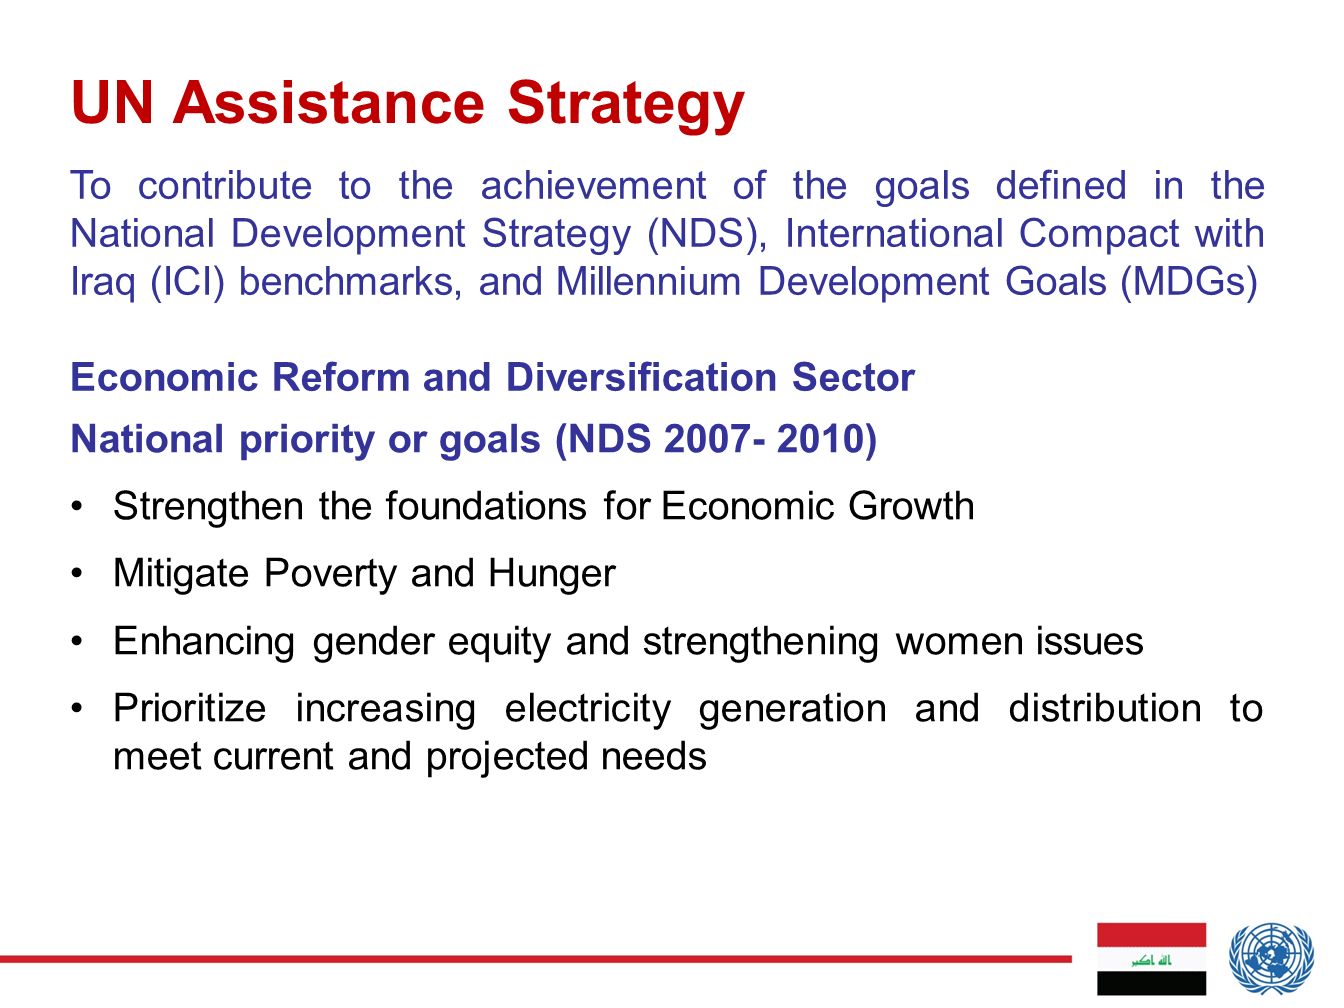 UN Assistance Strategy National priority or goals (NDS ) Strengthen the foundations for Economic Growth Mitigate Poverty and Hunger Enhancing gender equity and strengthening women issues Prioritize increasing electricity generation and distribution to meet current and projected needs To contribute to the achievement of the goals defined in the National Development Strategy (NDS), International Compact with Iraq (ICI) benchmarks, and Millennium Development Goals (MDGs) Economic Reform and Diversification Sector